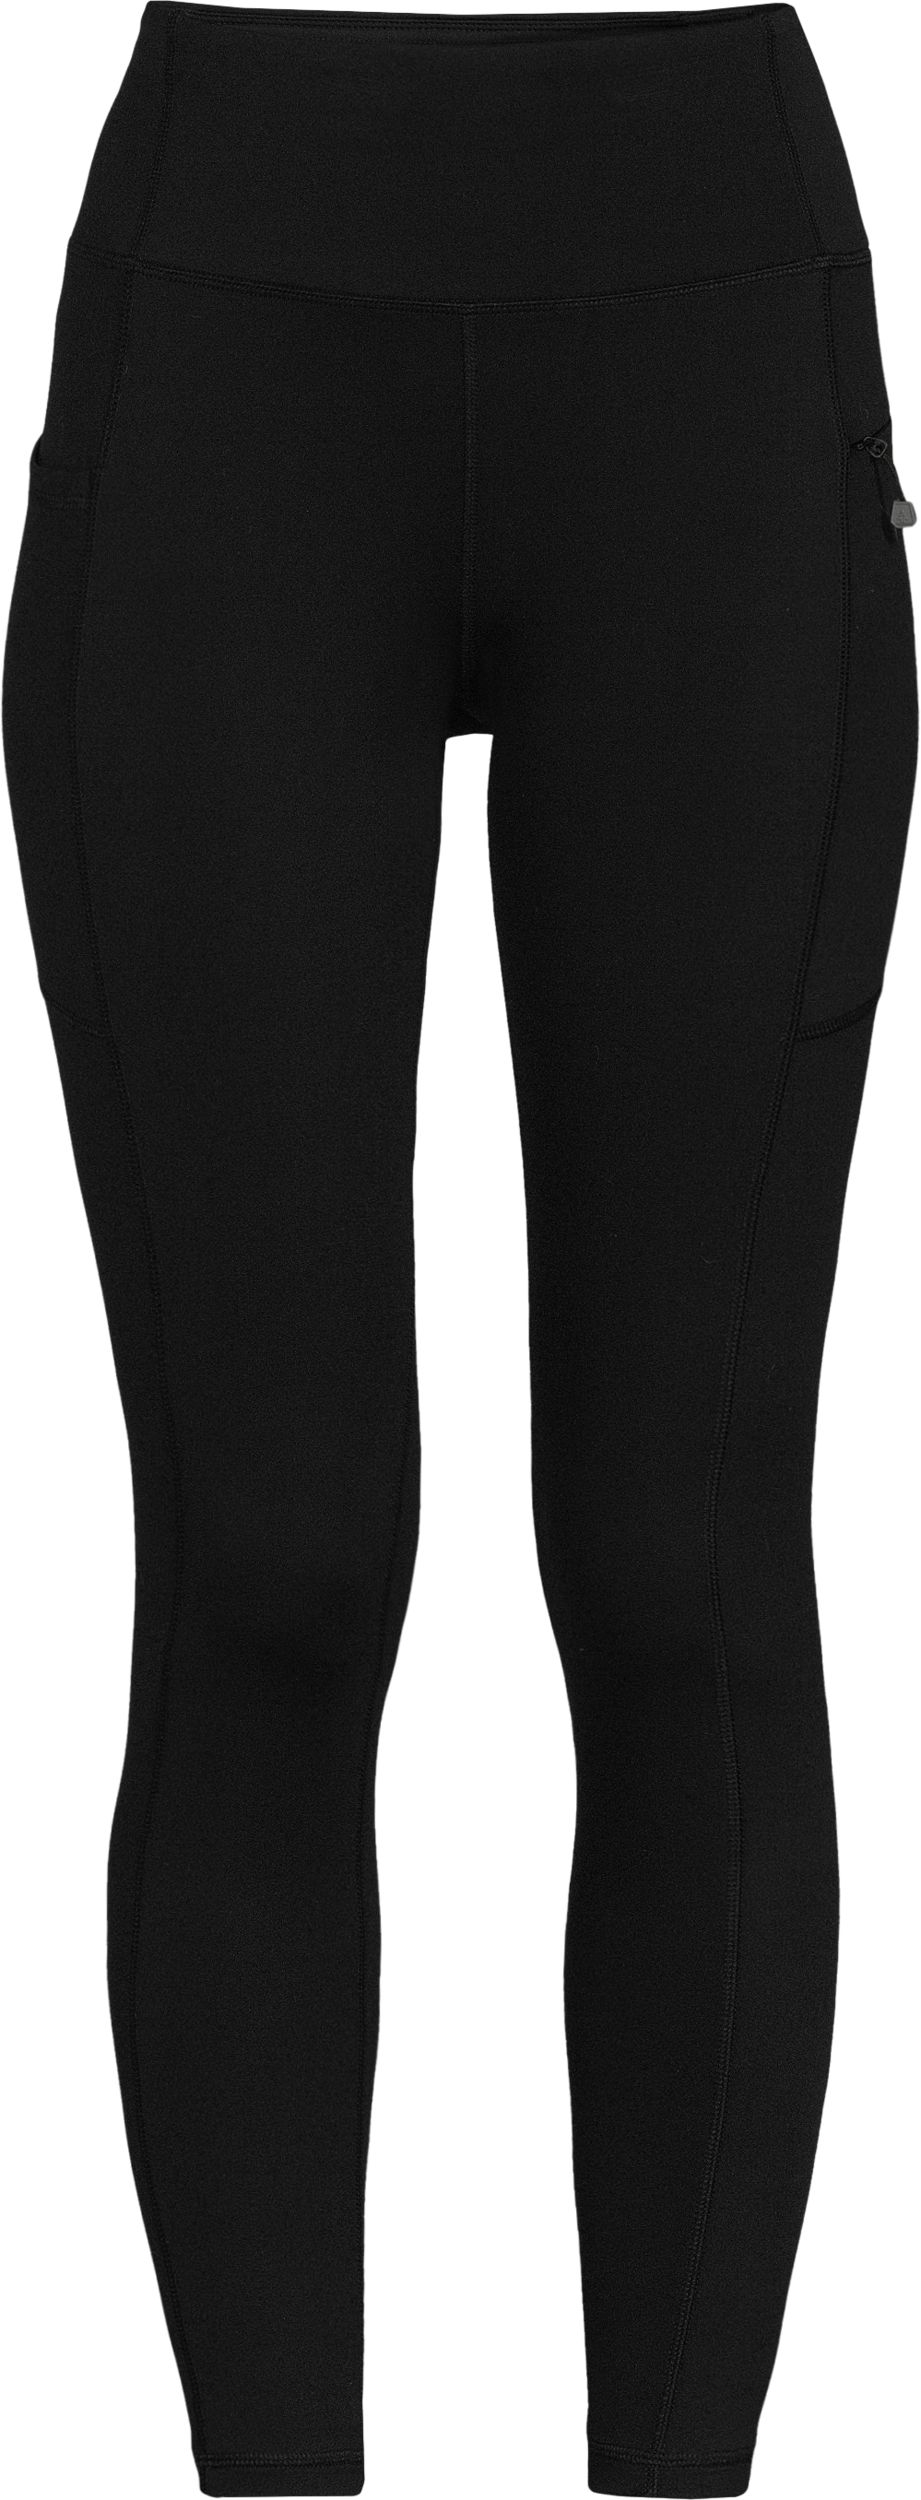 https://media-www.sportchek.ca/product/div-03-softgoods/dpt-72-casual-clothing/sdpt-02-womens/333327882/woods-w-aley-trekking-tights-s21-55ec8401-5796-42b5-ac8f-185b519198a5-jpgrendition.jpg?imdensity=1&imwidth=1244&impolicy=mZoom